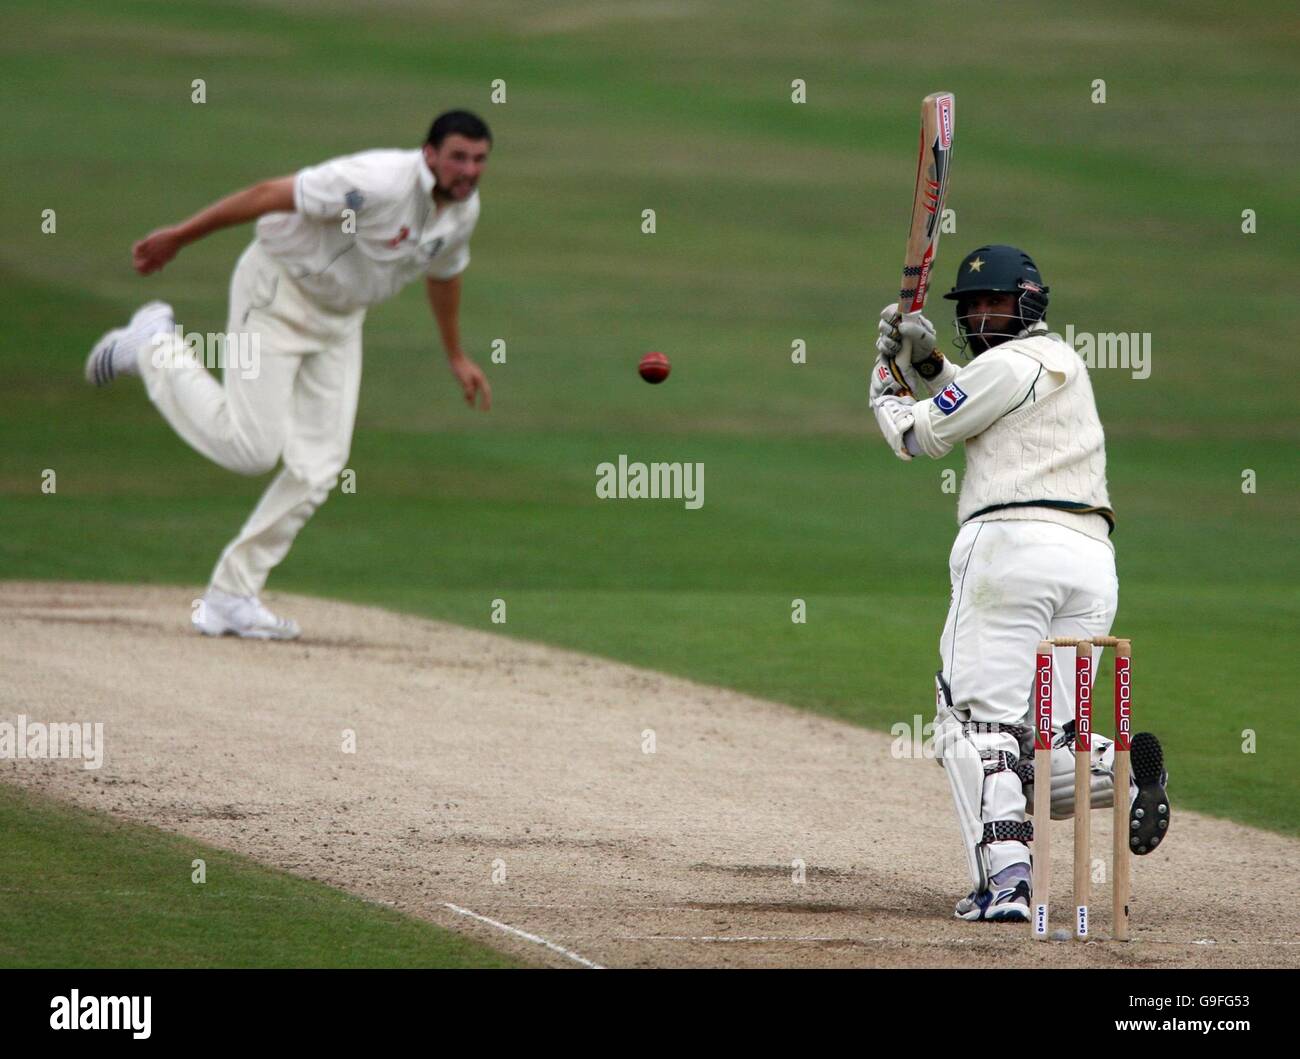 Pakistan batsman Mohammad Yousuf scores runs off England bowler Steve Harmison during the second day of the Third npower Test match at Headingley, Leeds. Stock Photo